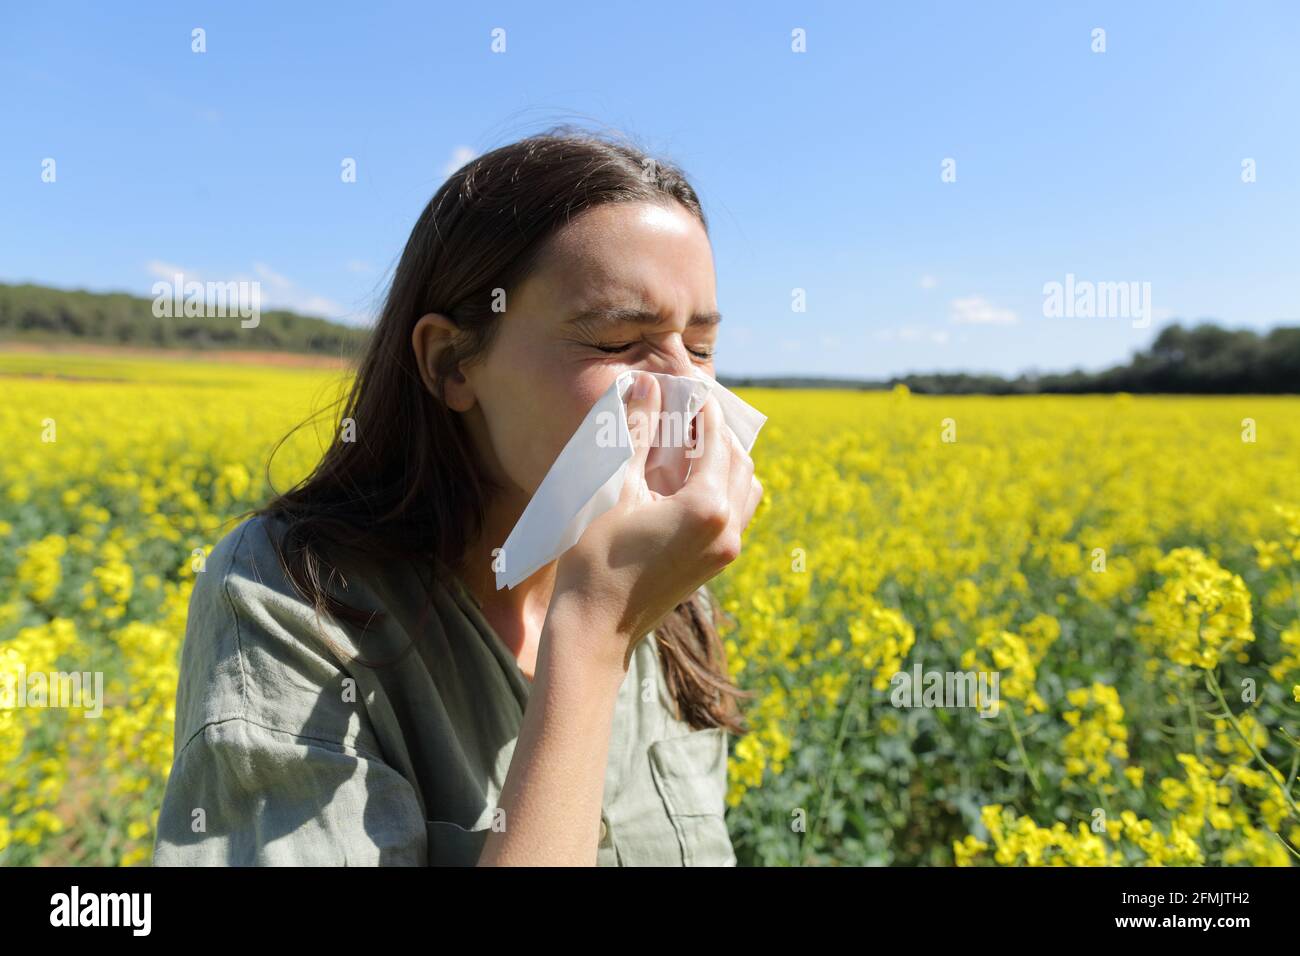 Allergic woman blowing nose standing in a field in spring season Stock Photo